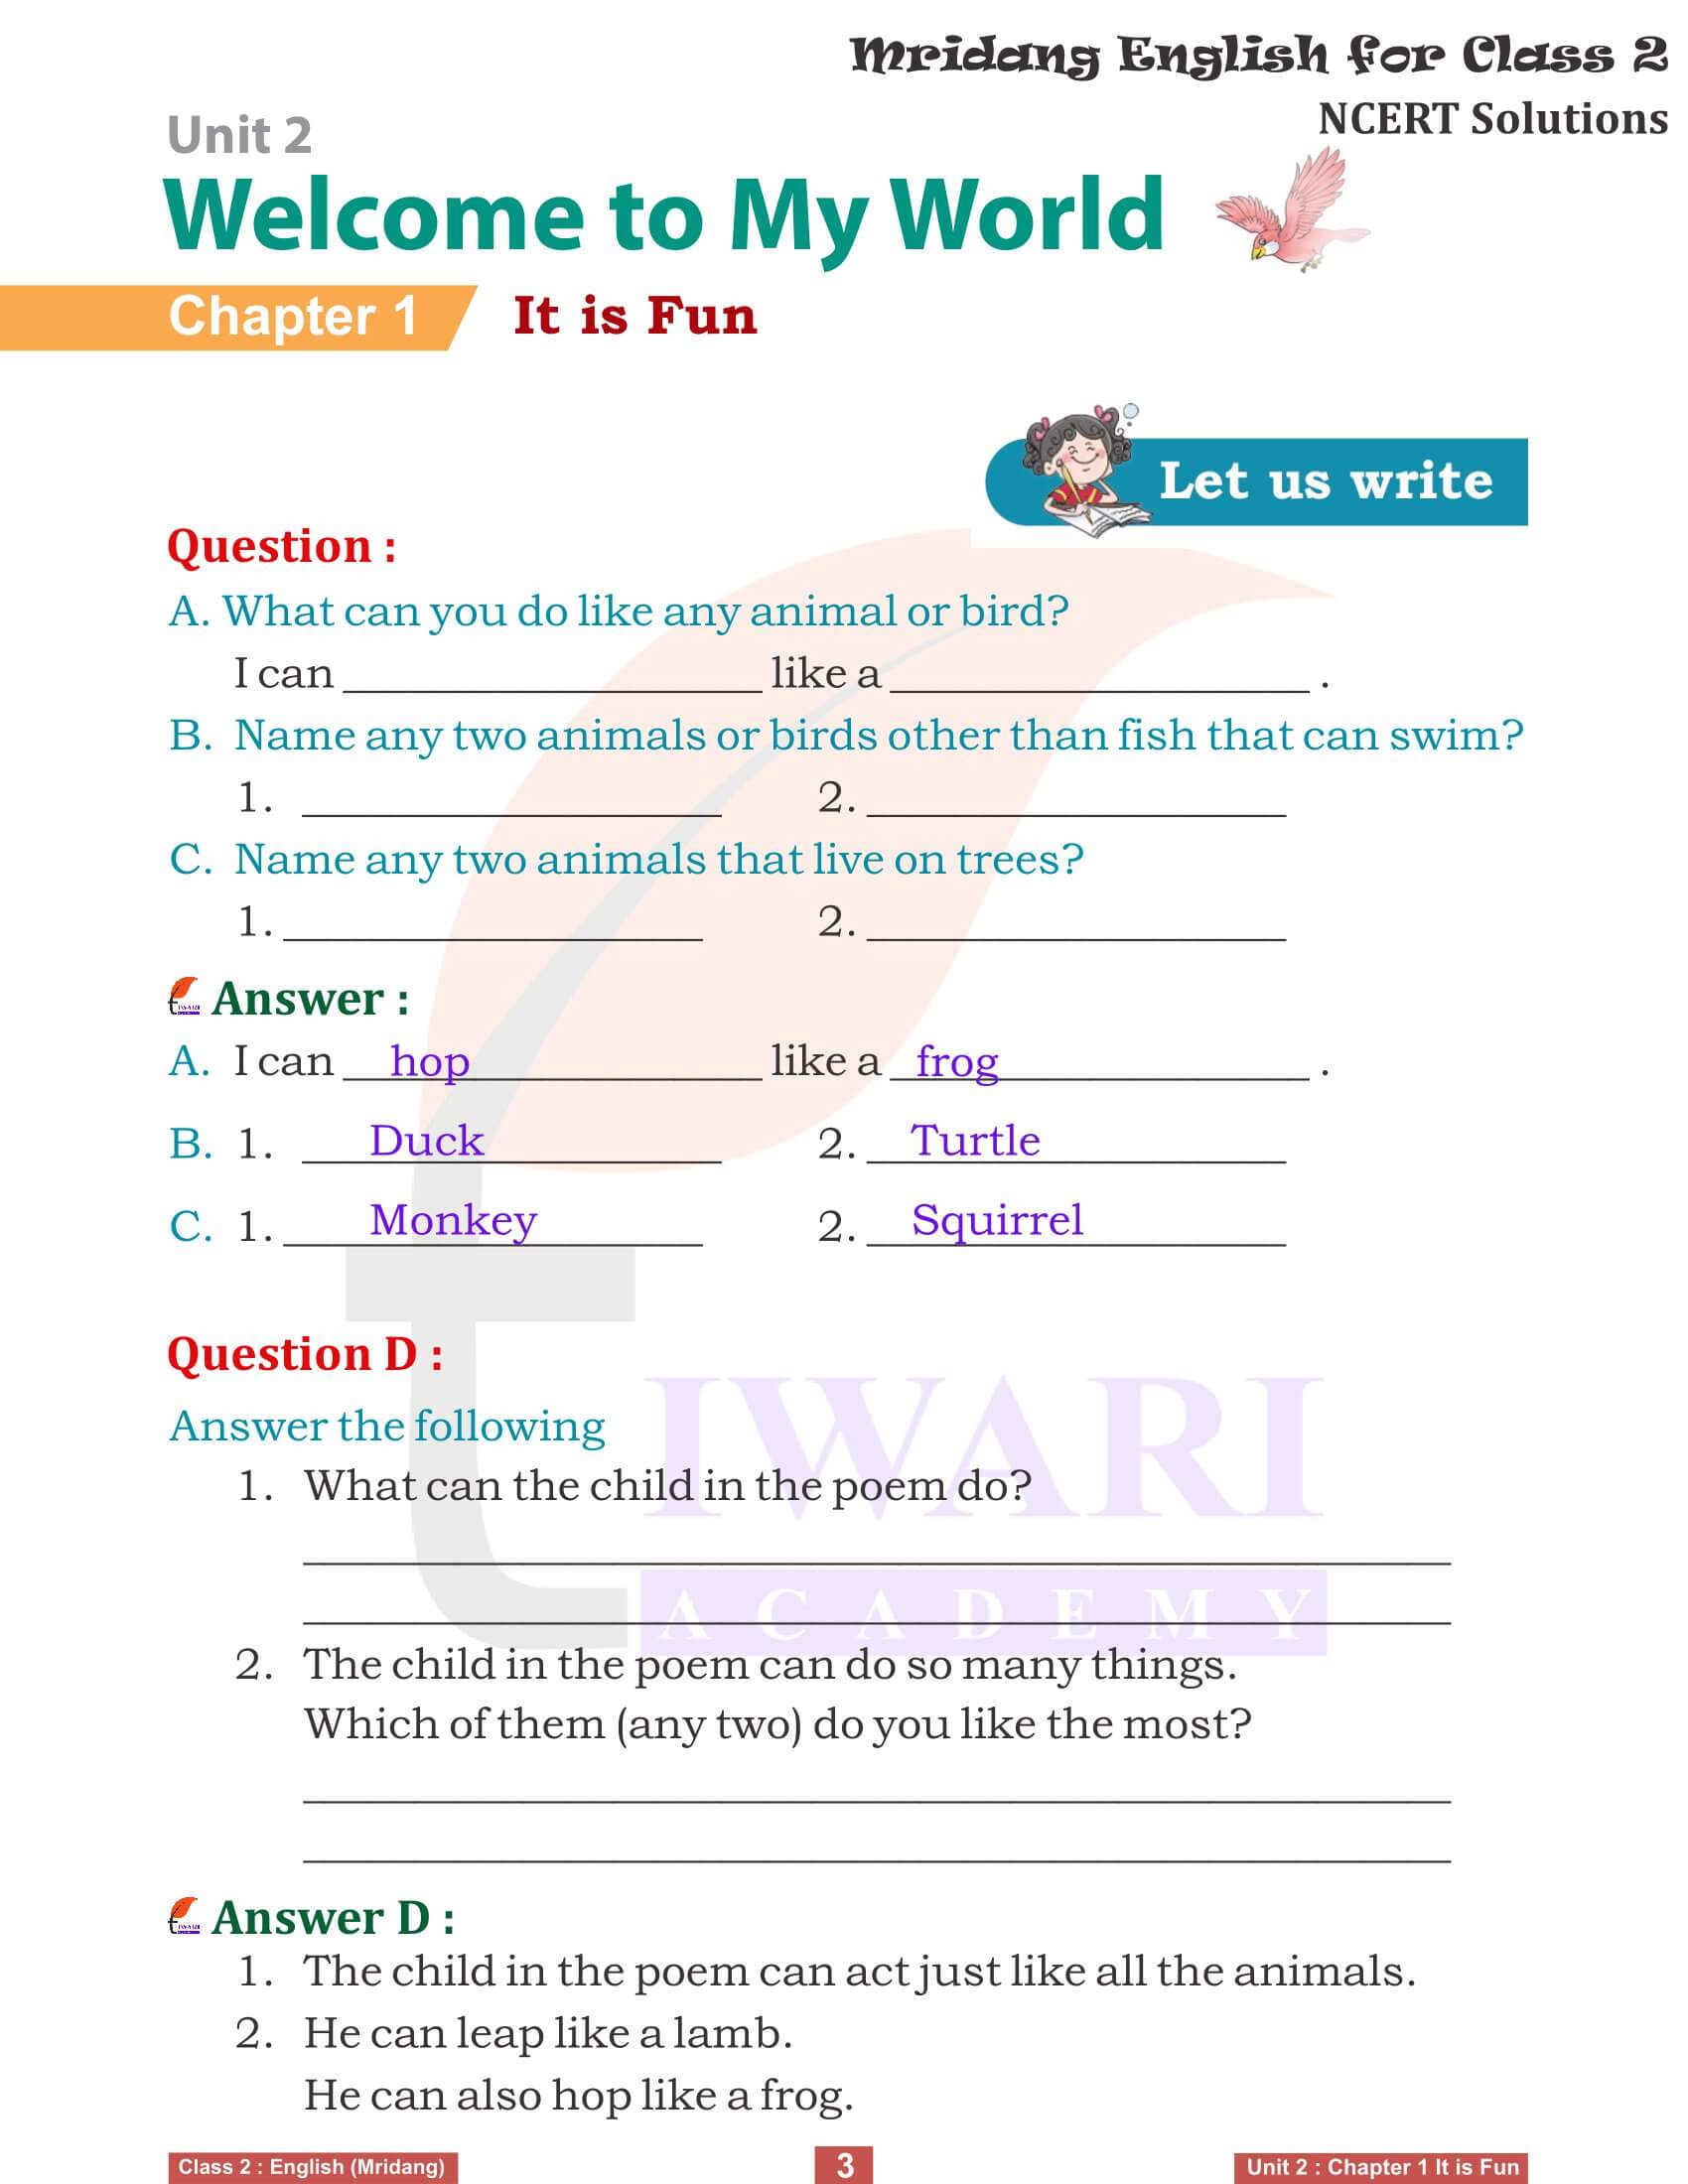 NCERT Solutions for Class 2 English Mridang Unit 2 Welcome to My World Chapter 2 Seeing without Seeing all Answers